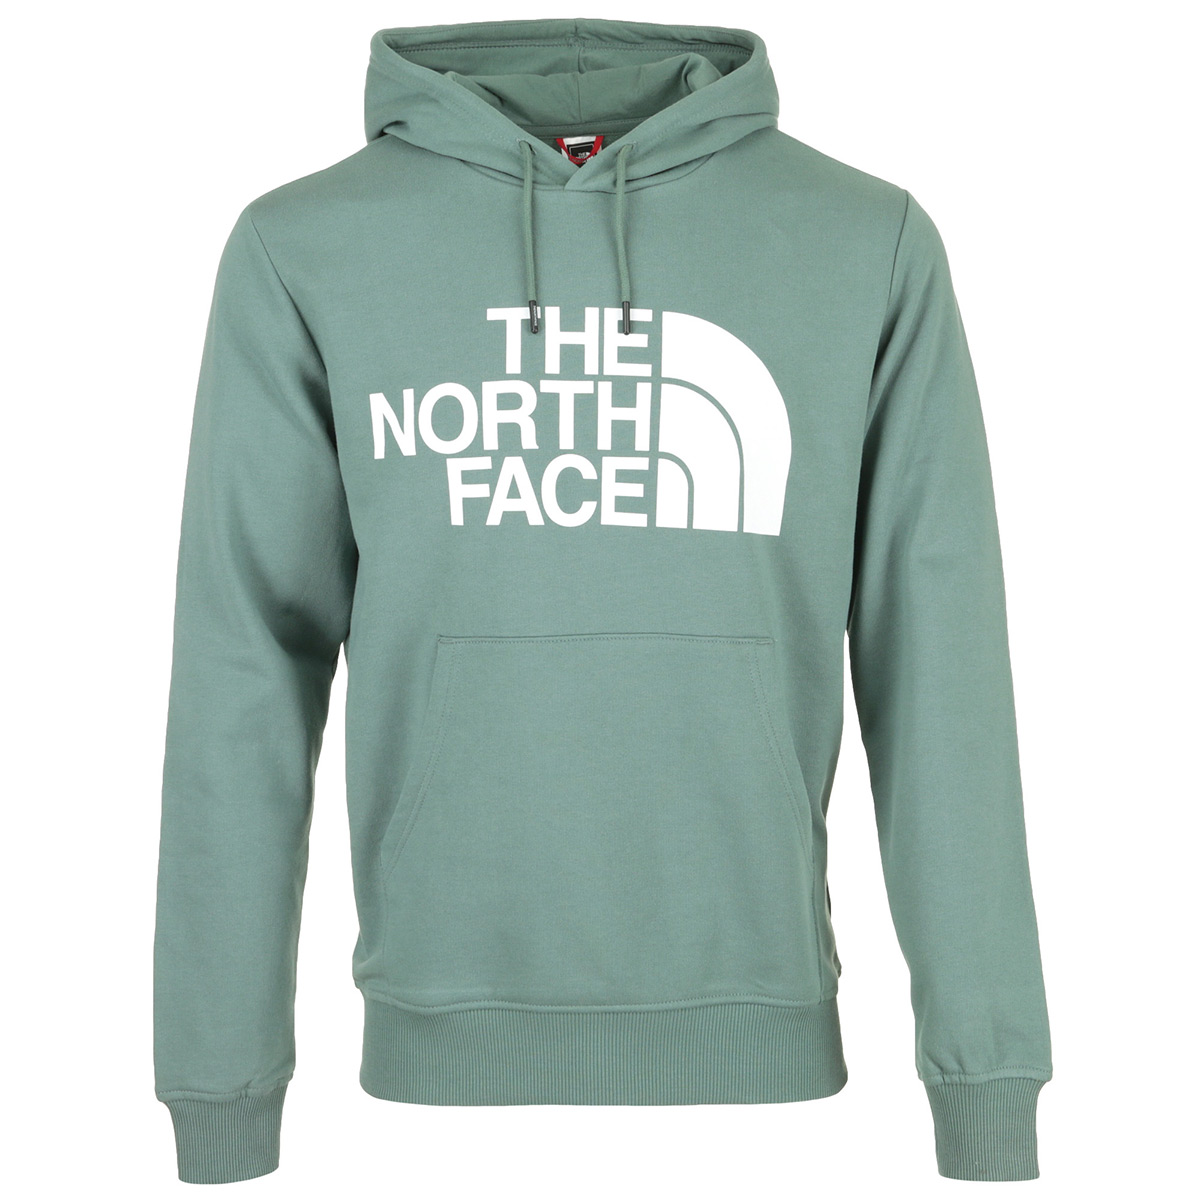 The North Face "Standard Hoodie"